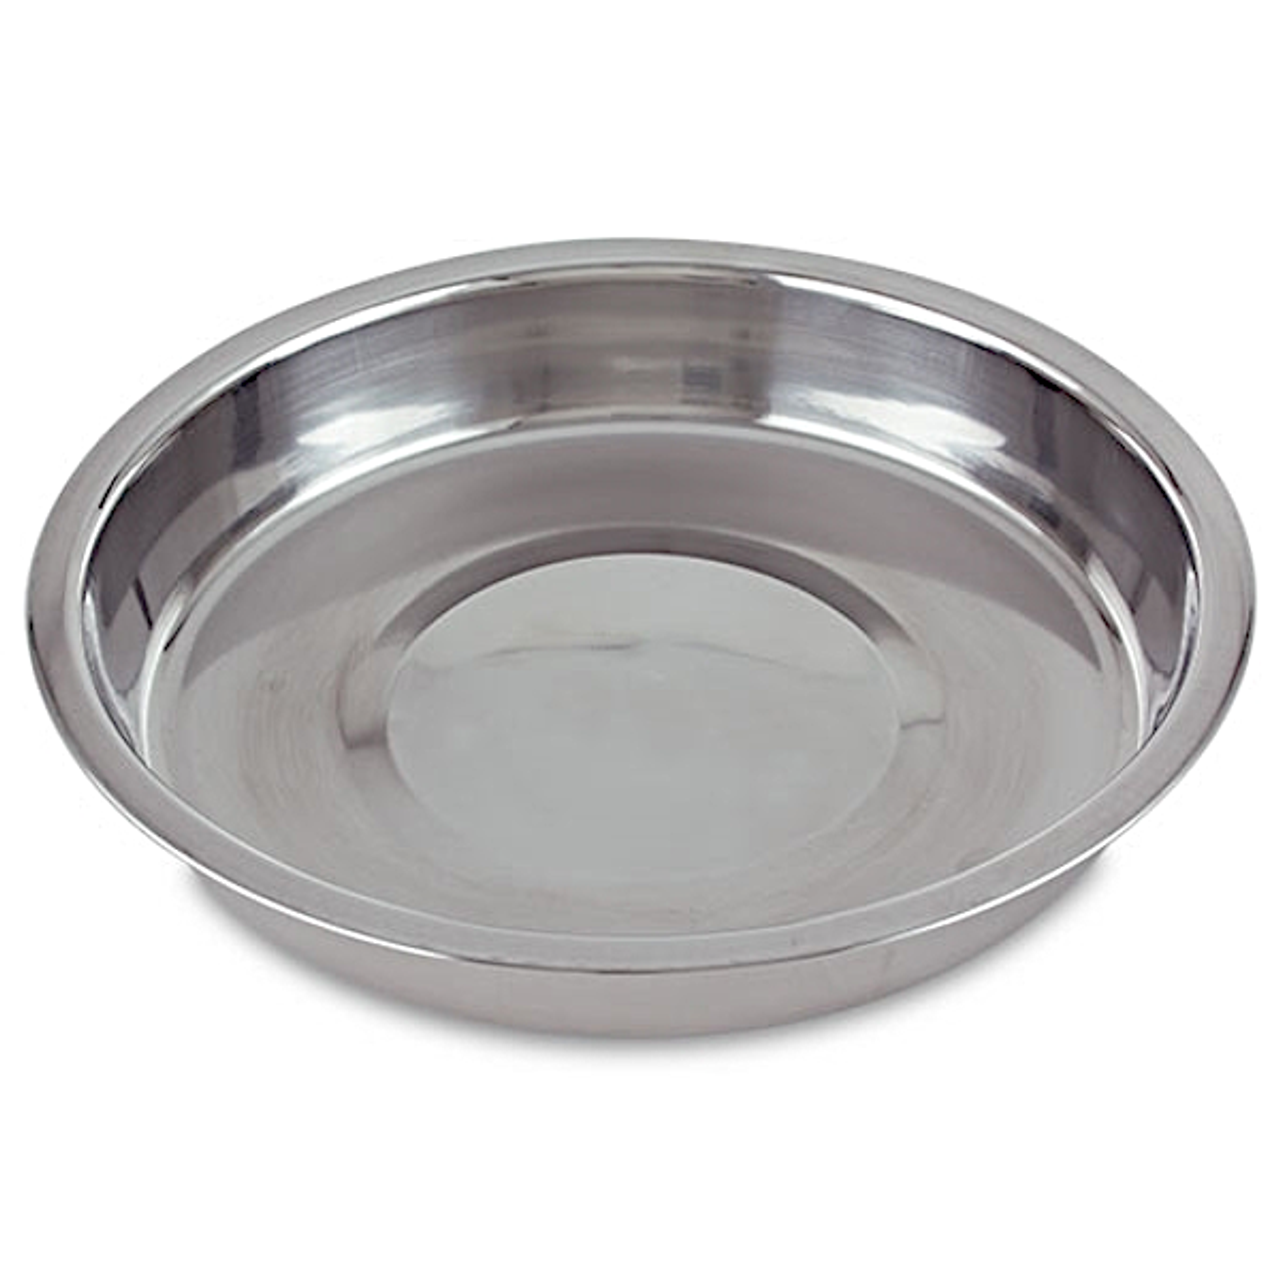 stainless steel puppy pan at okie dog supply